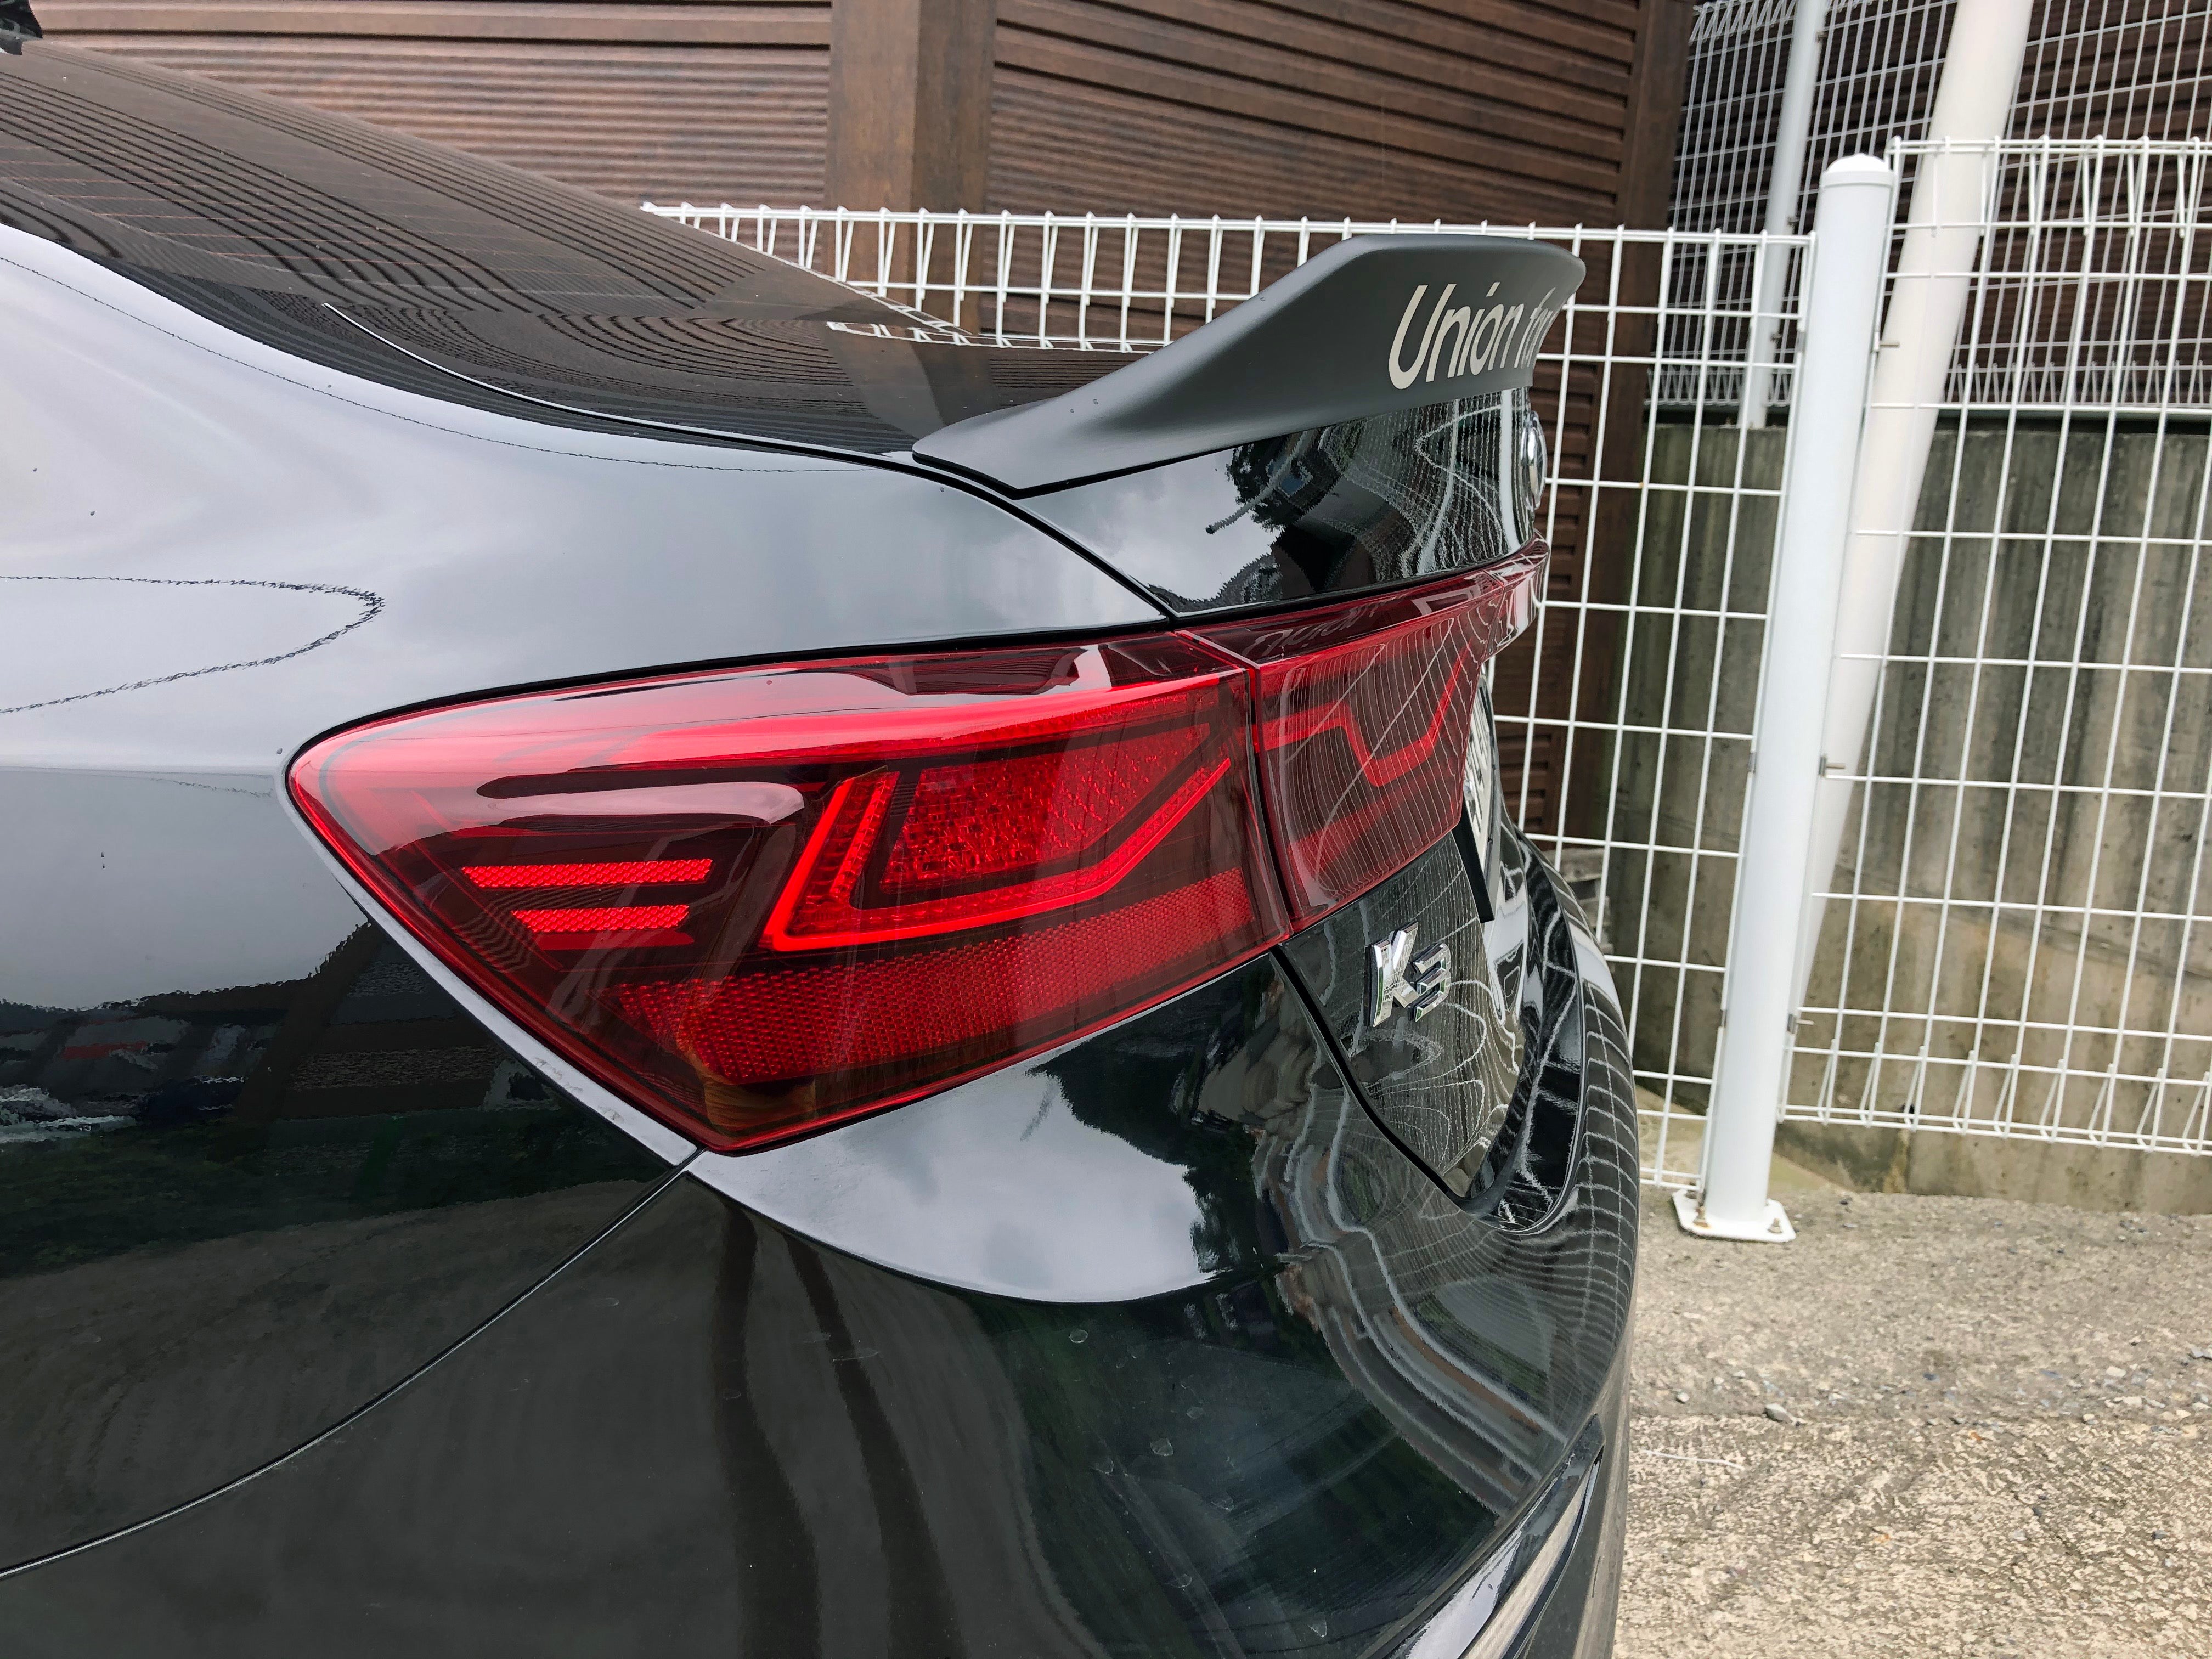 Duckbill Spoiler for Kia K3 Forte Sedan 2019-2021 [KDMHolic Collection with UNR Performance] US Inventory